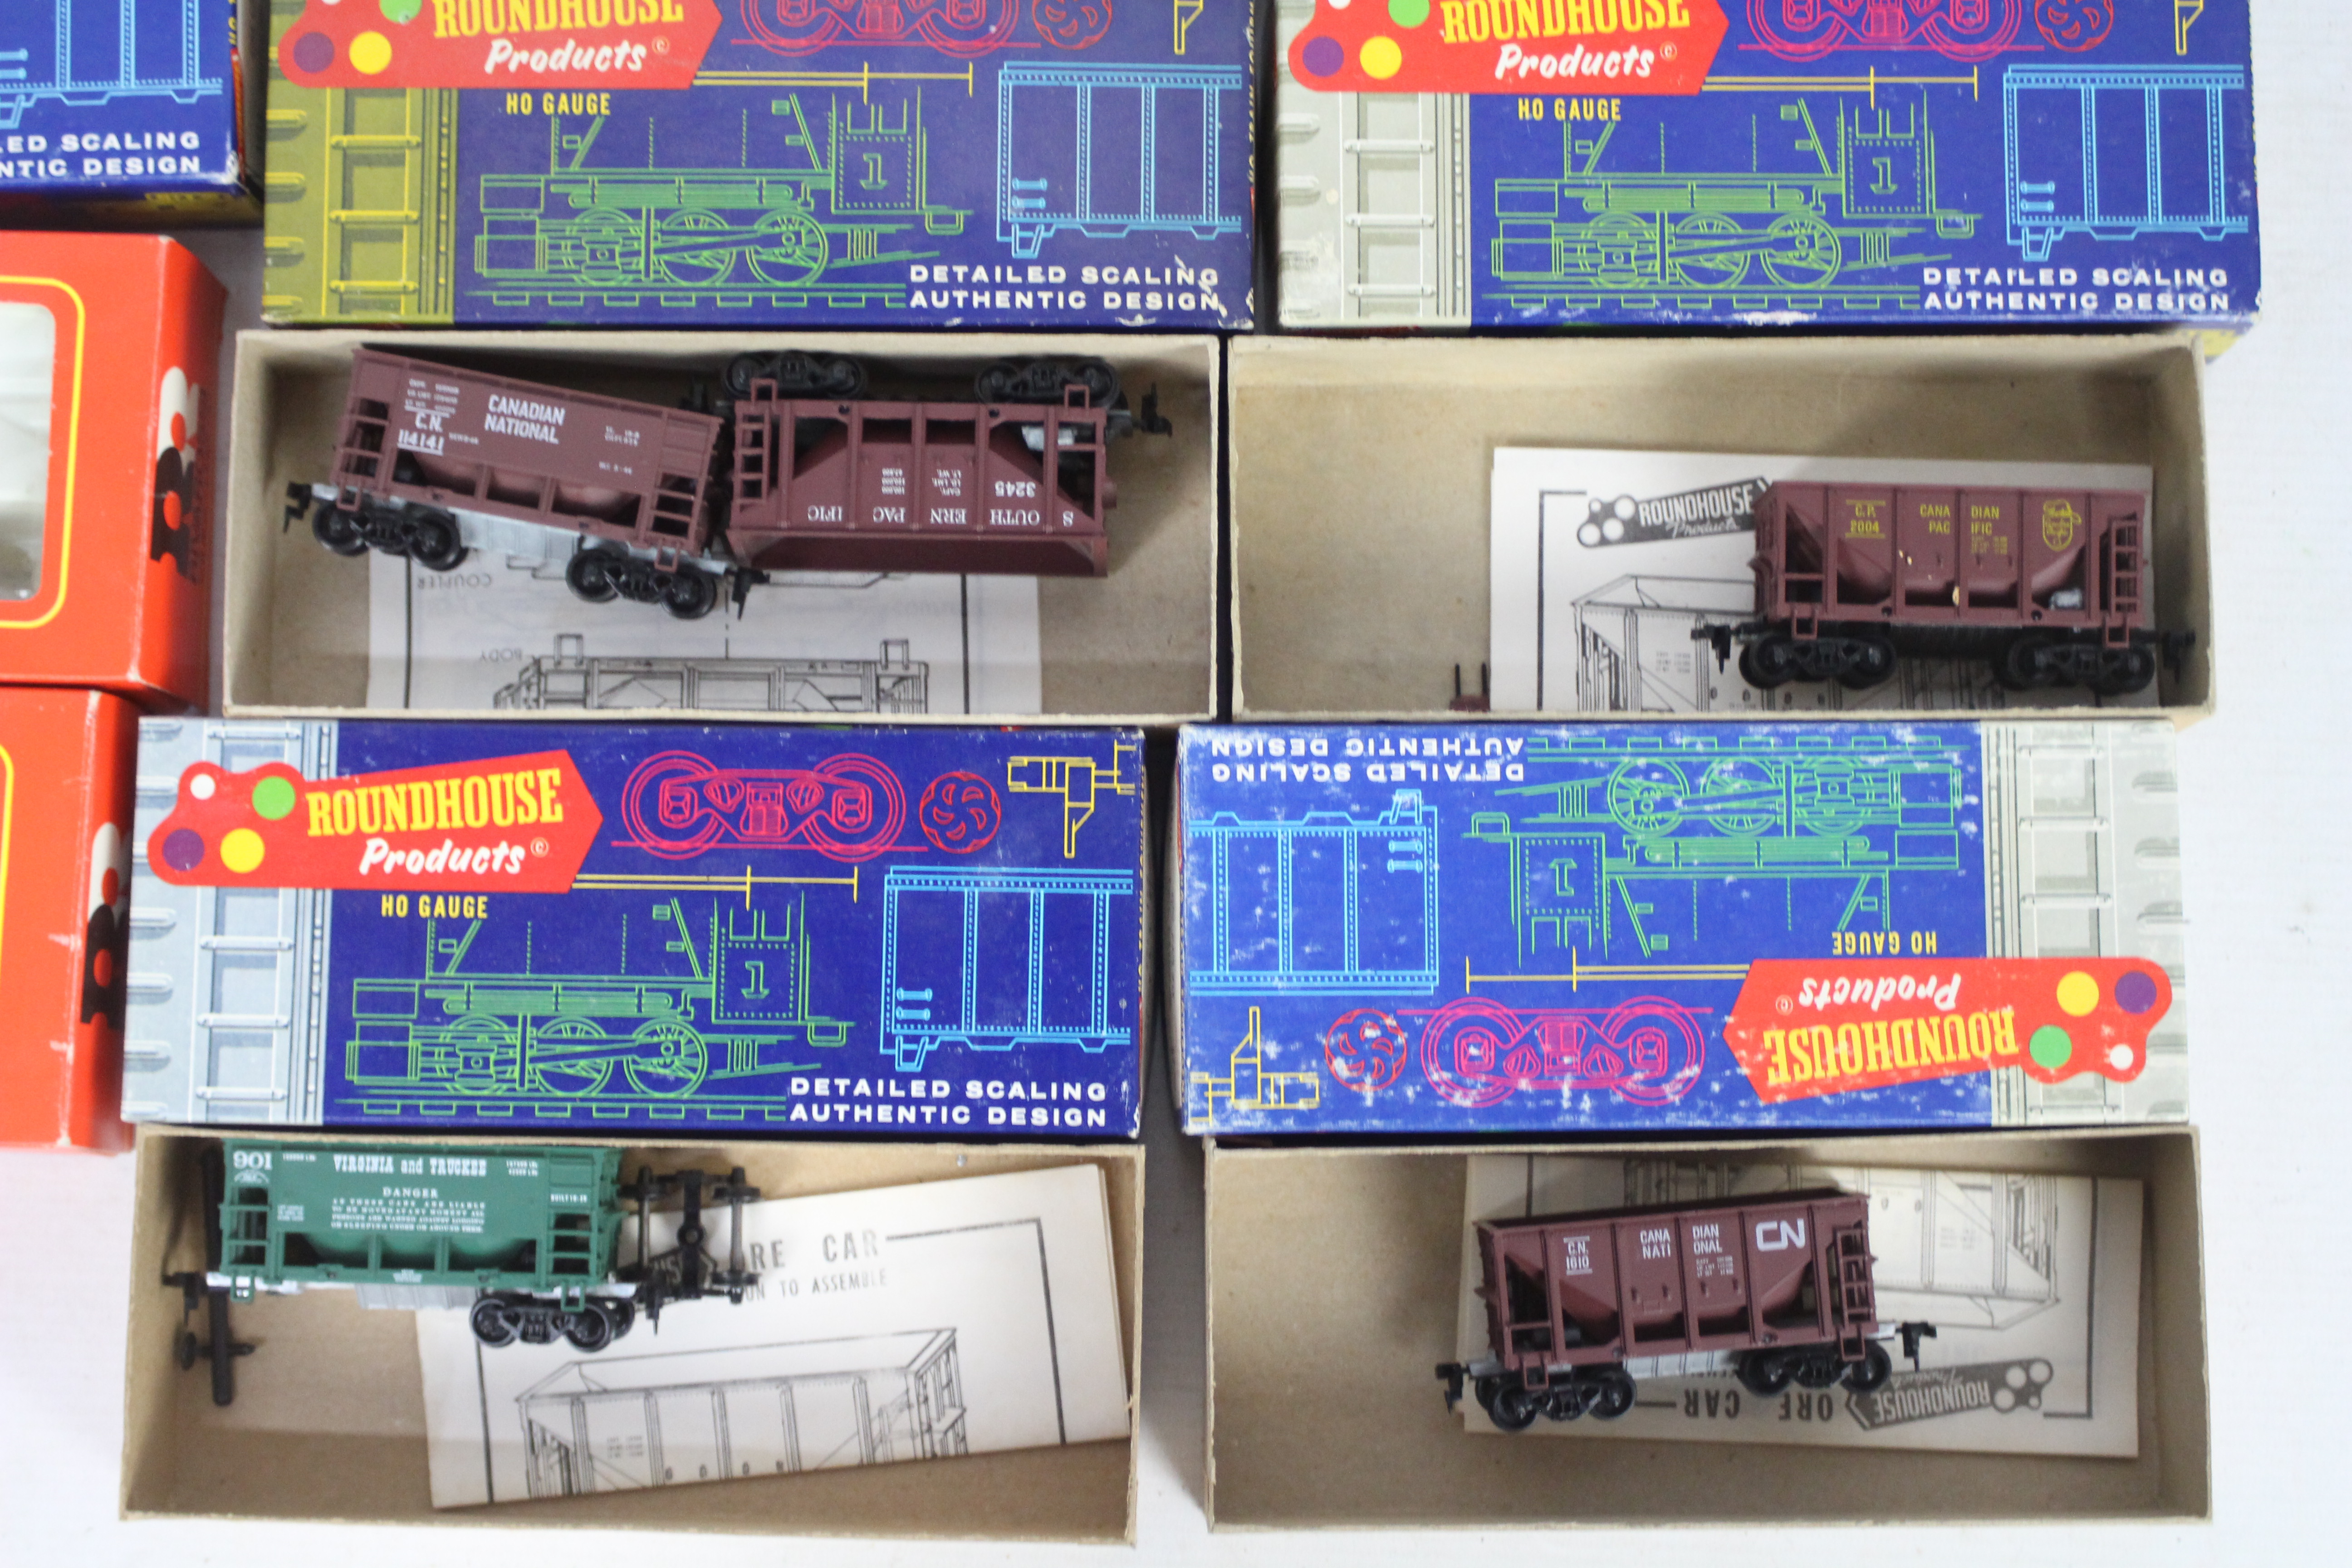 Roundhouse - Rivarossi - 12 x HO Scale wagons including 10 x Ore Cars in various liveries # 1422 - Image 2 of 4